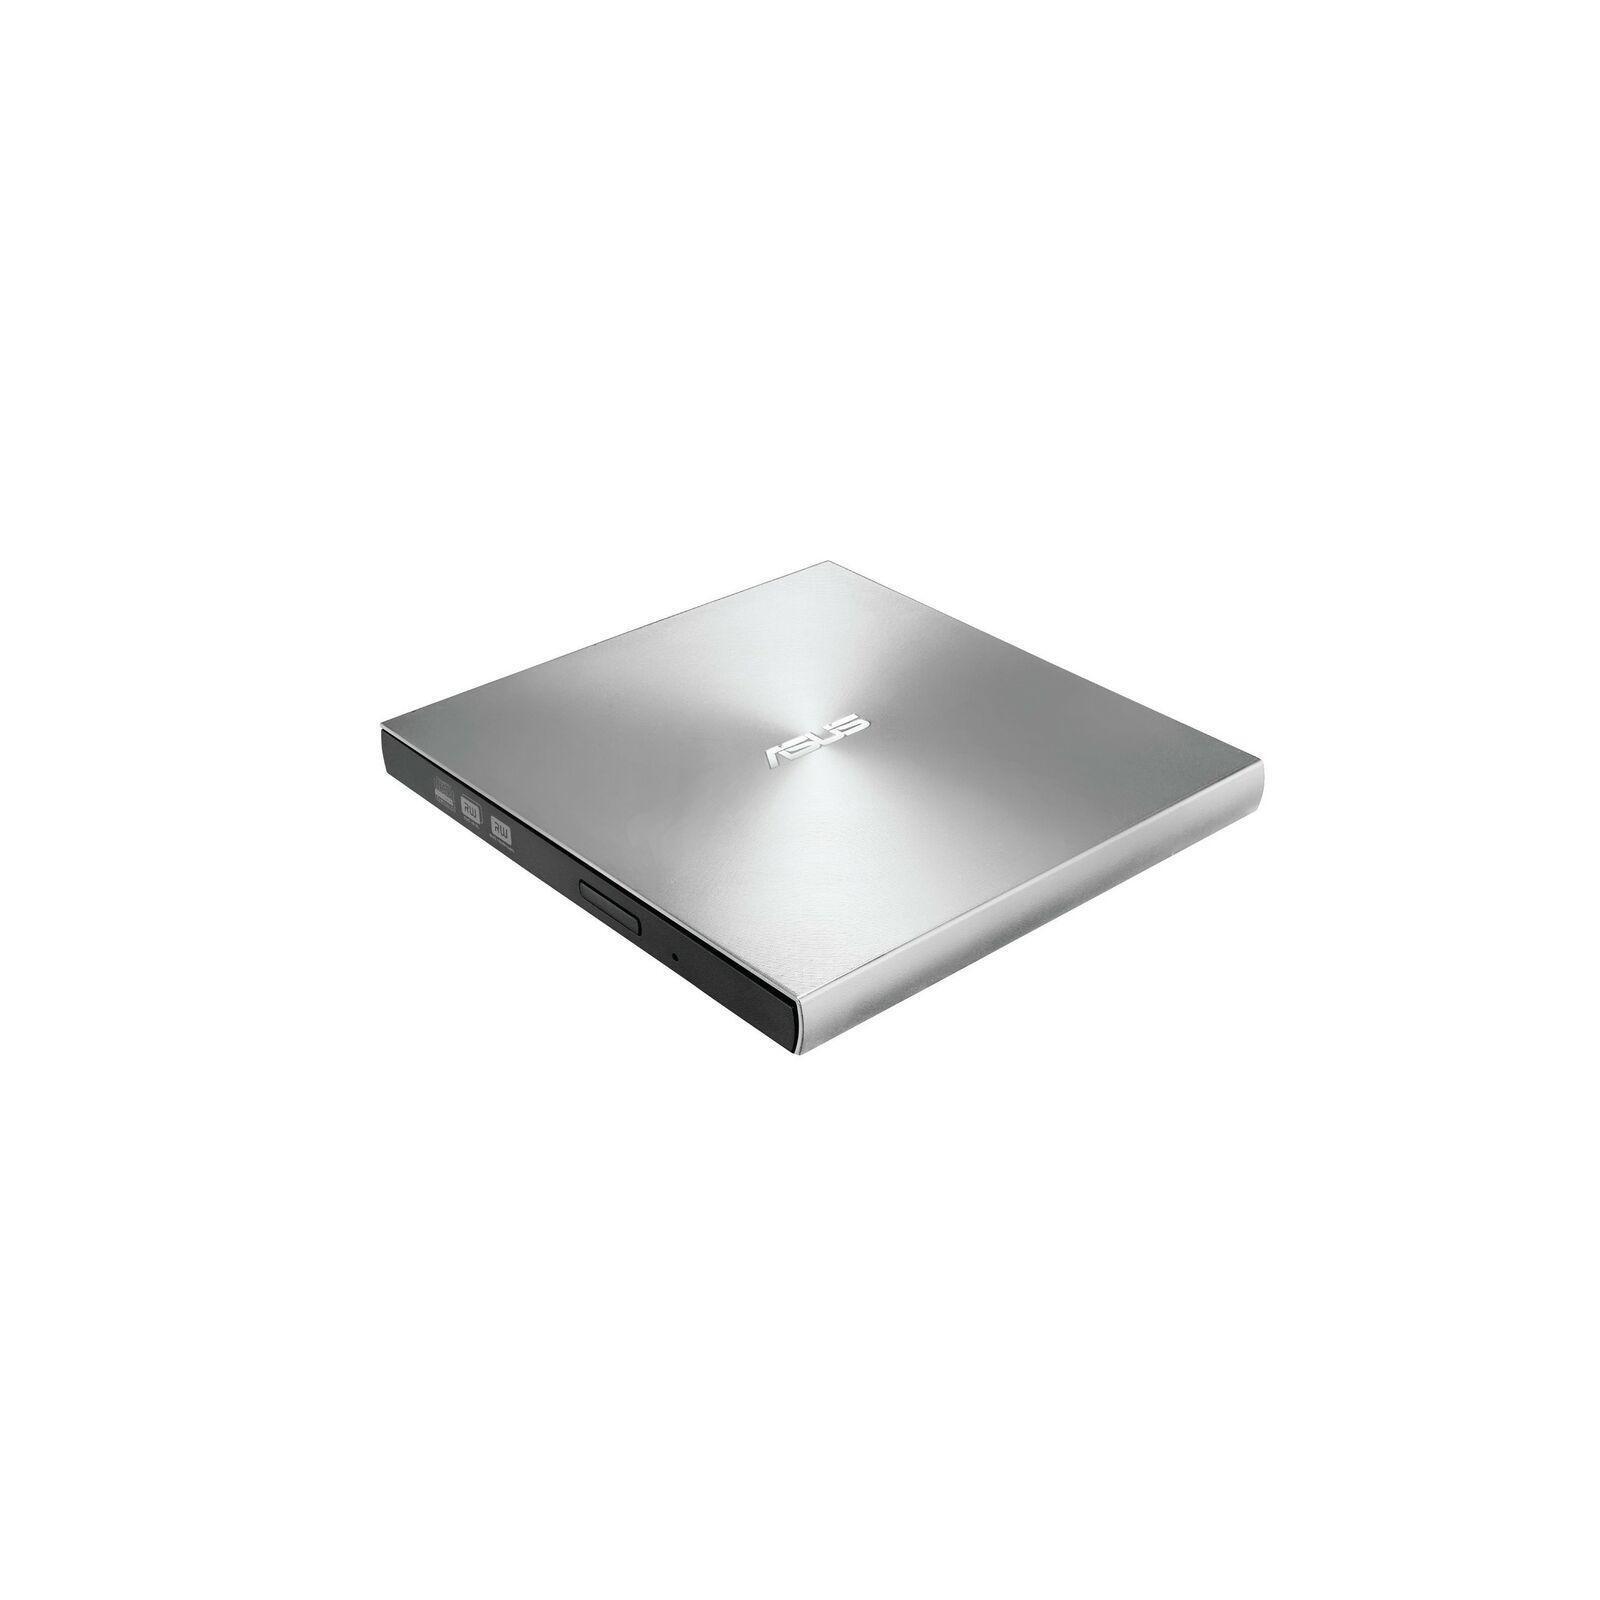 Asus Zendrive Silver 13mm External 8x Dvd/ Burner Drive +/-rw with M-disc